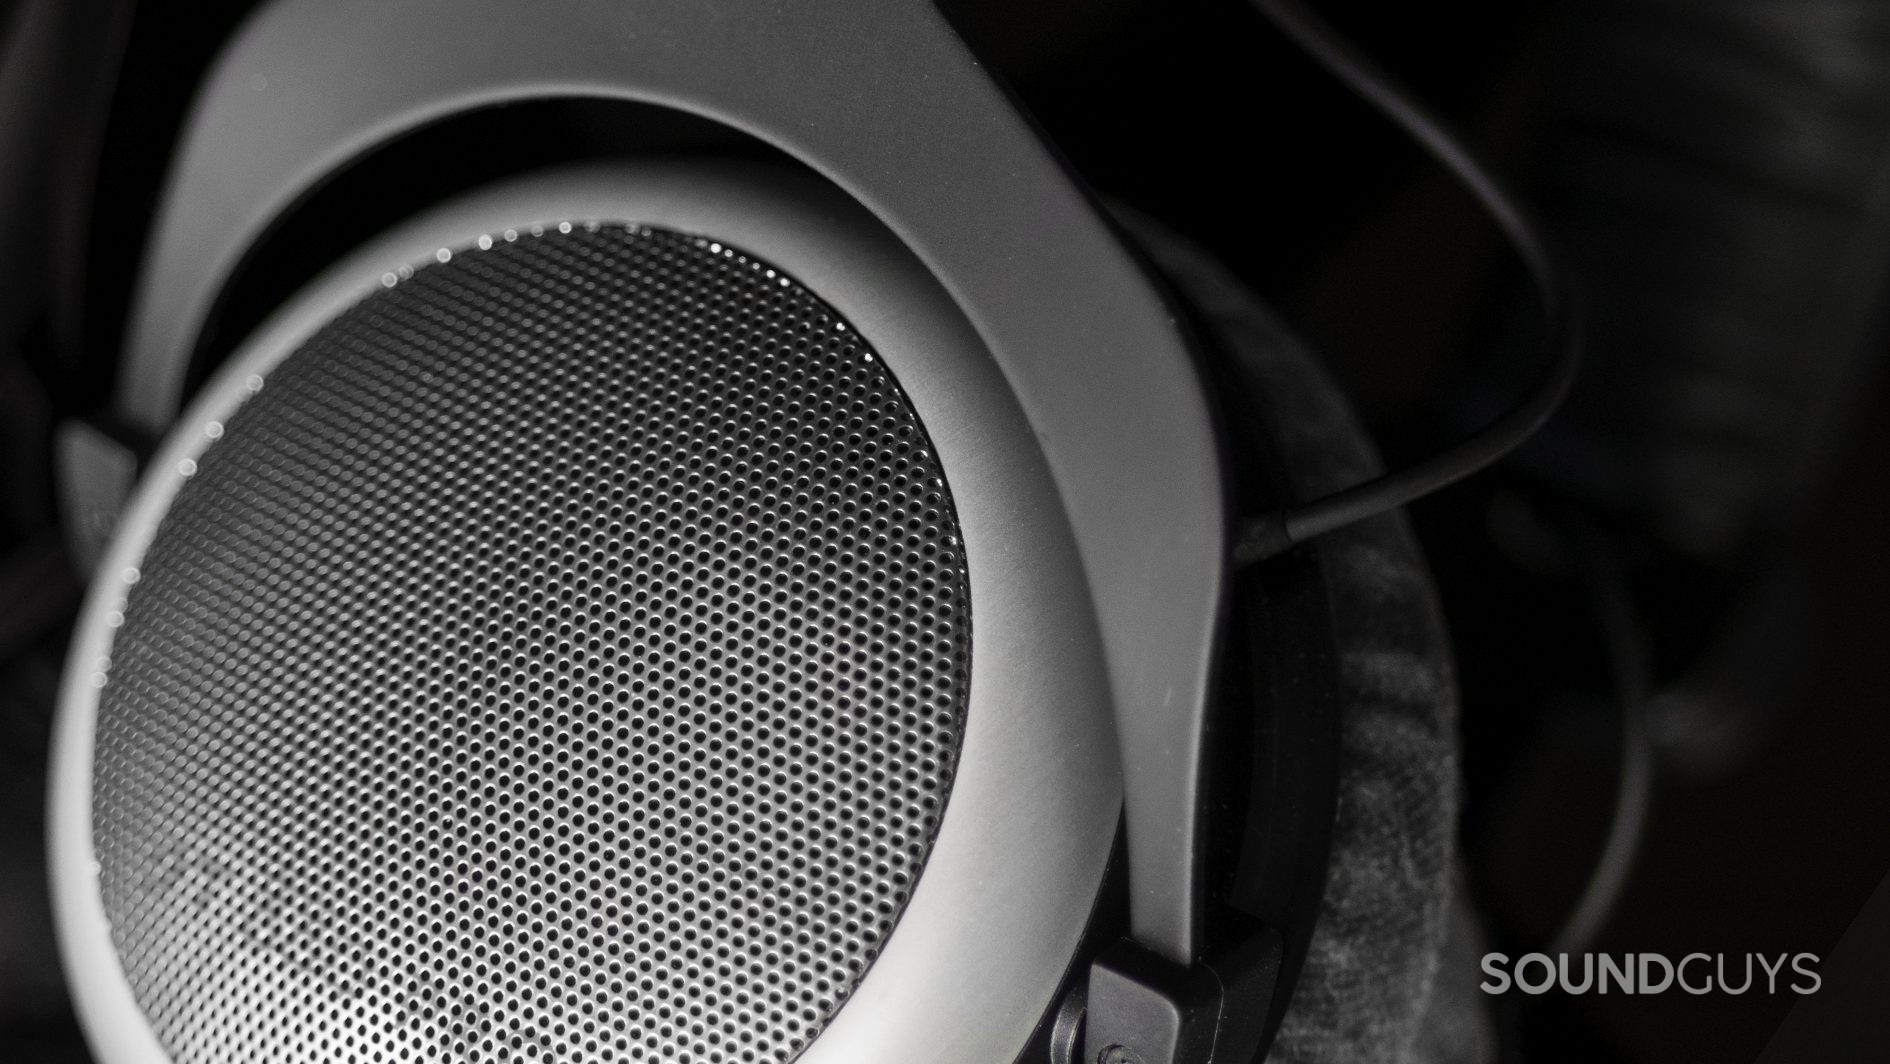 The Beyerdynamic DT 880 PRO open-back headphone grille with the velour ear pads in frame.